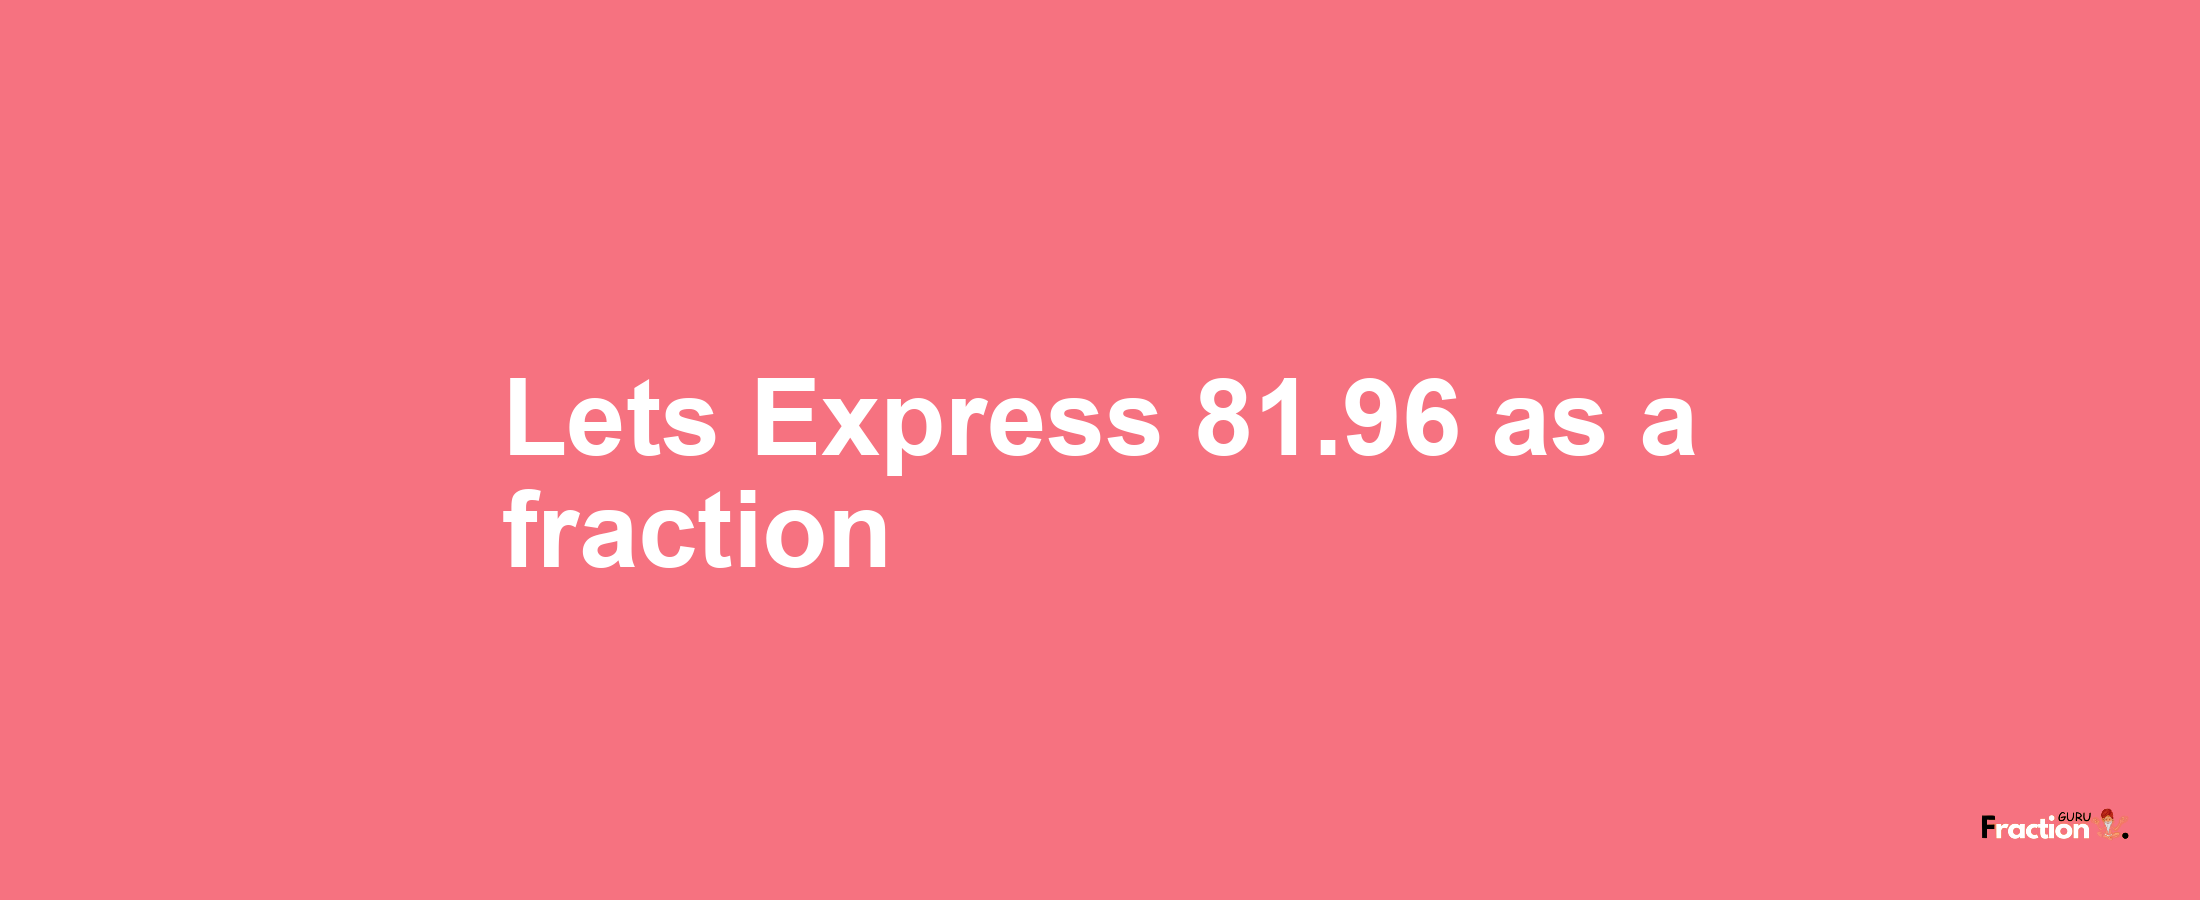 Lets Express 81.96 as afraction